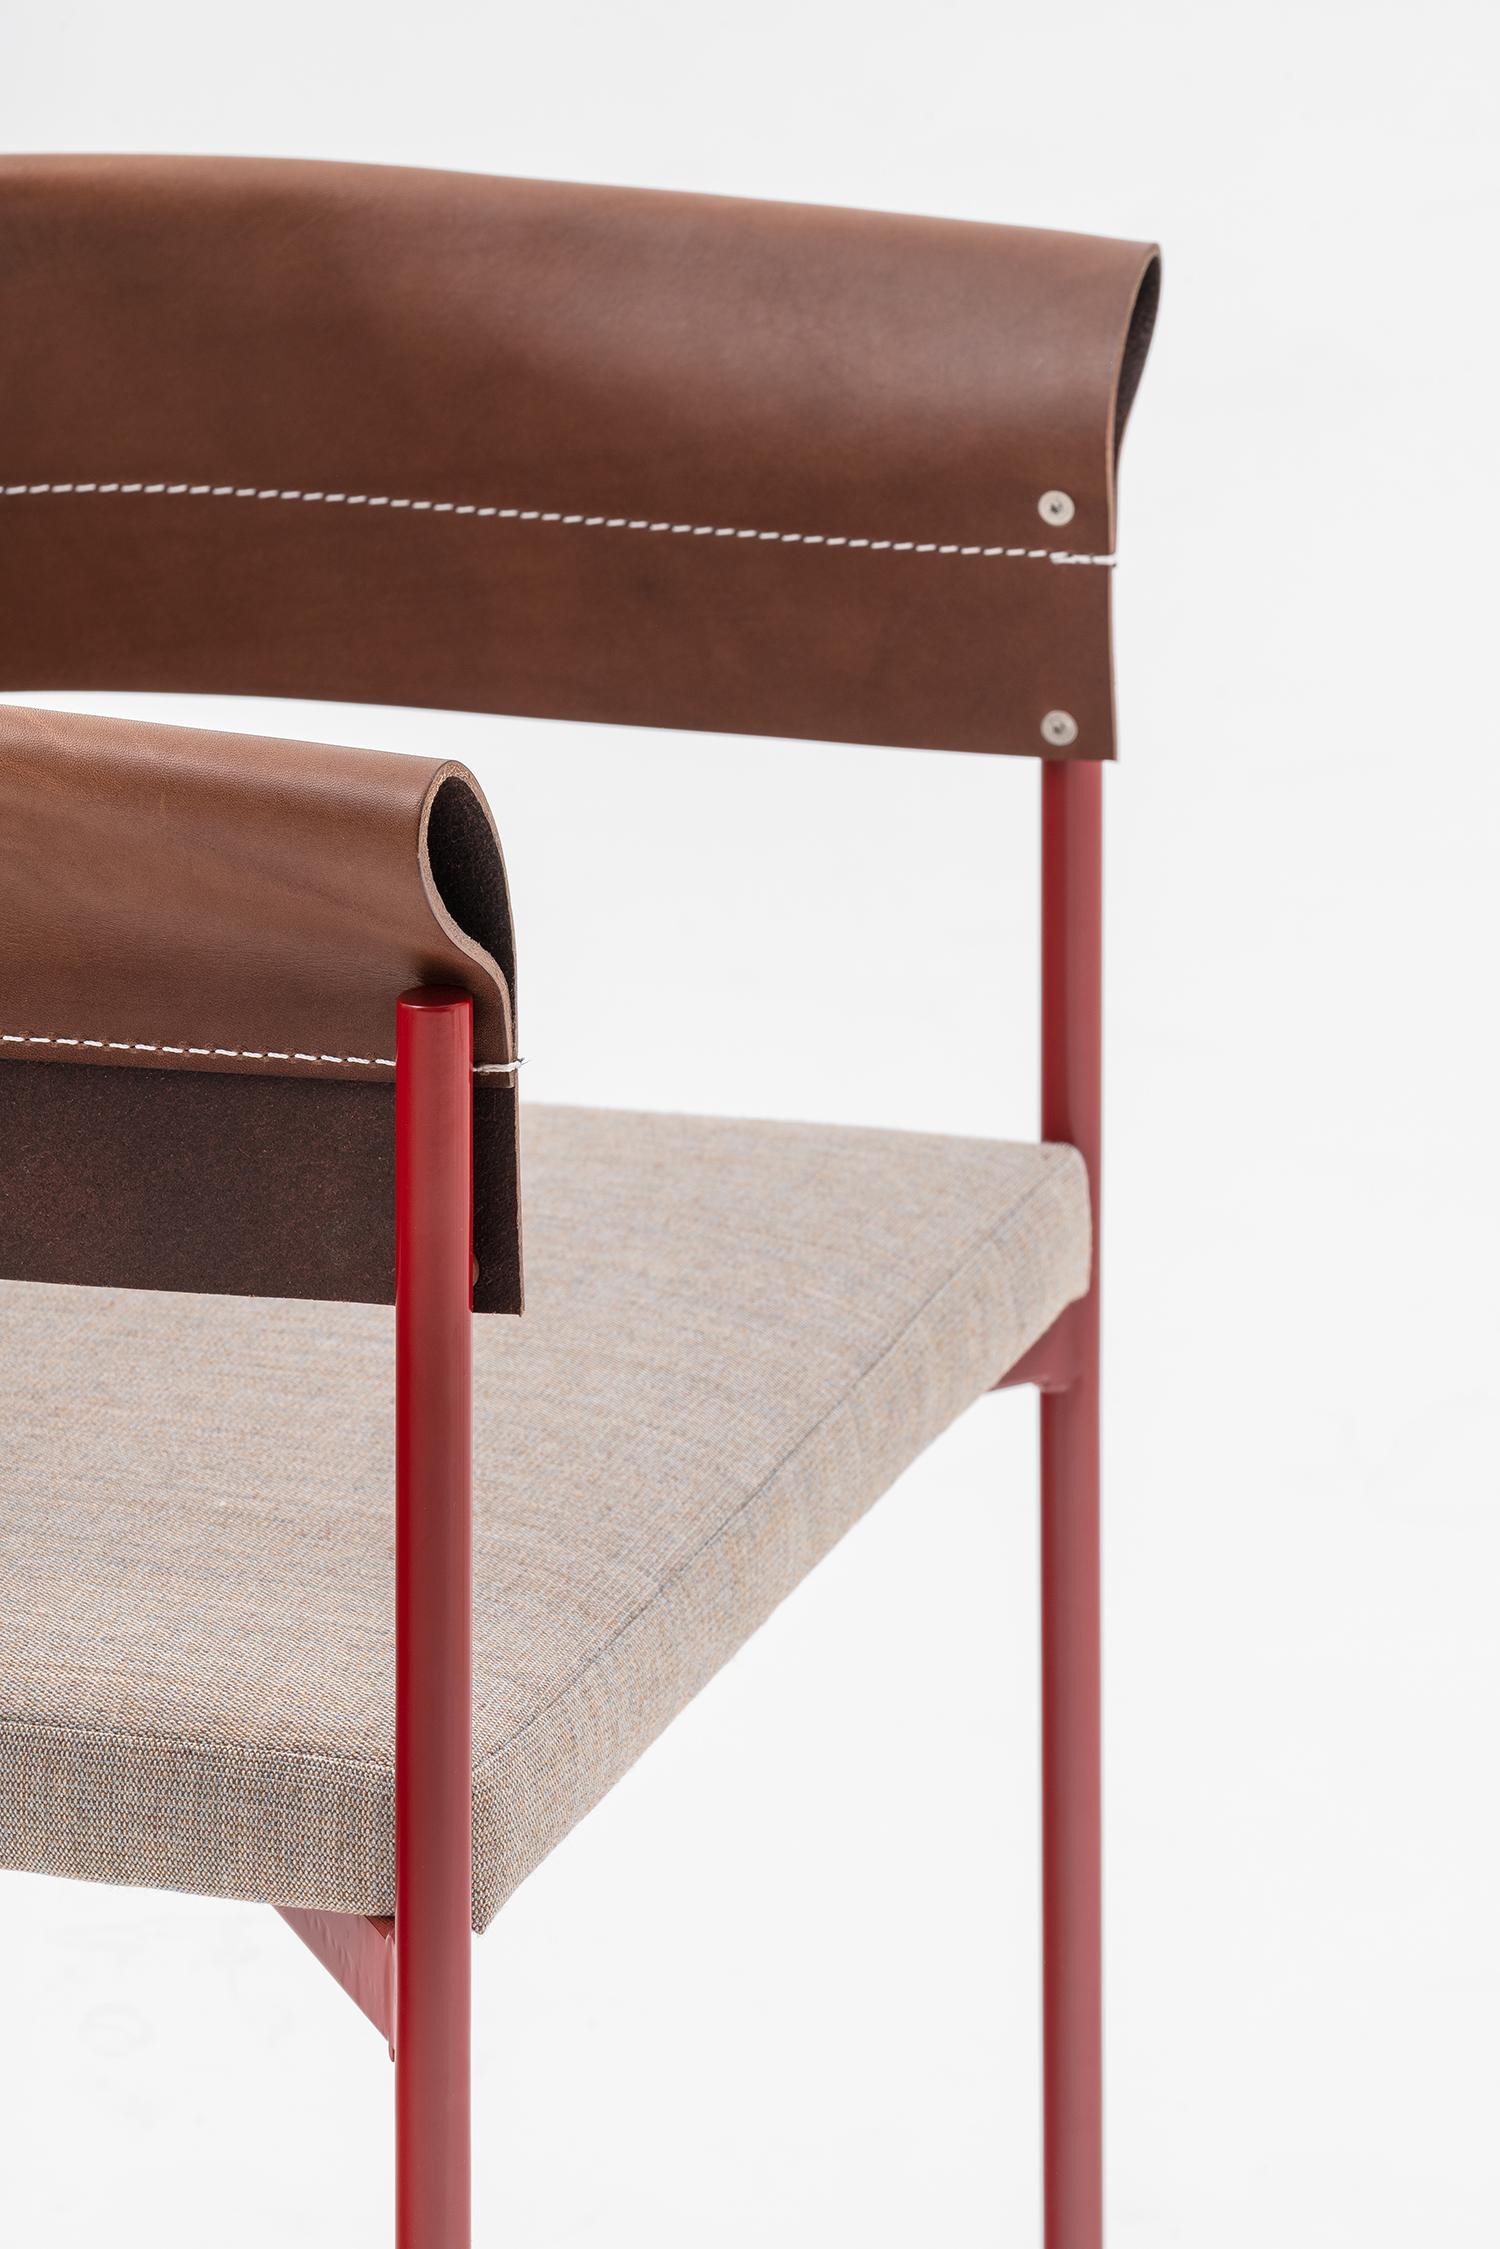 Lounge armchair made with a thin and elegant hand-welded steel frame whose curvature supports the precious leather, folded and sewn to act as a backrest and the same time as an armrest. Available in red, blue, black structure as per the full grain